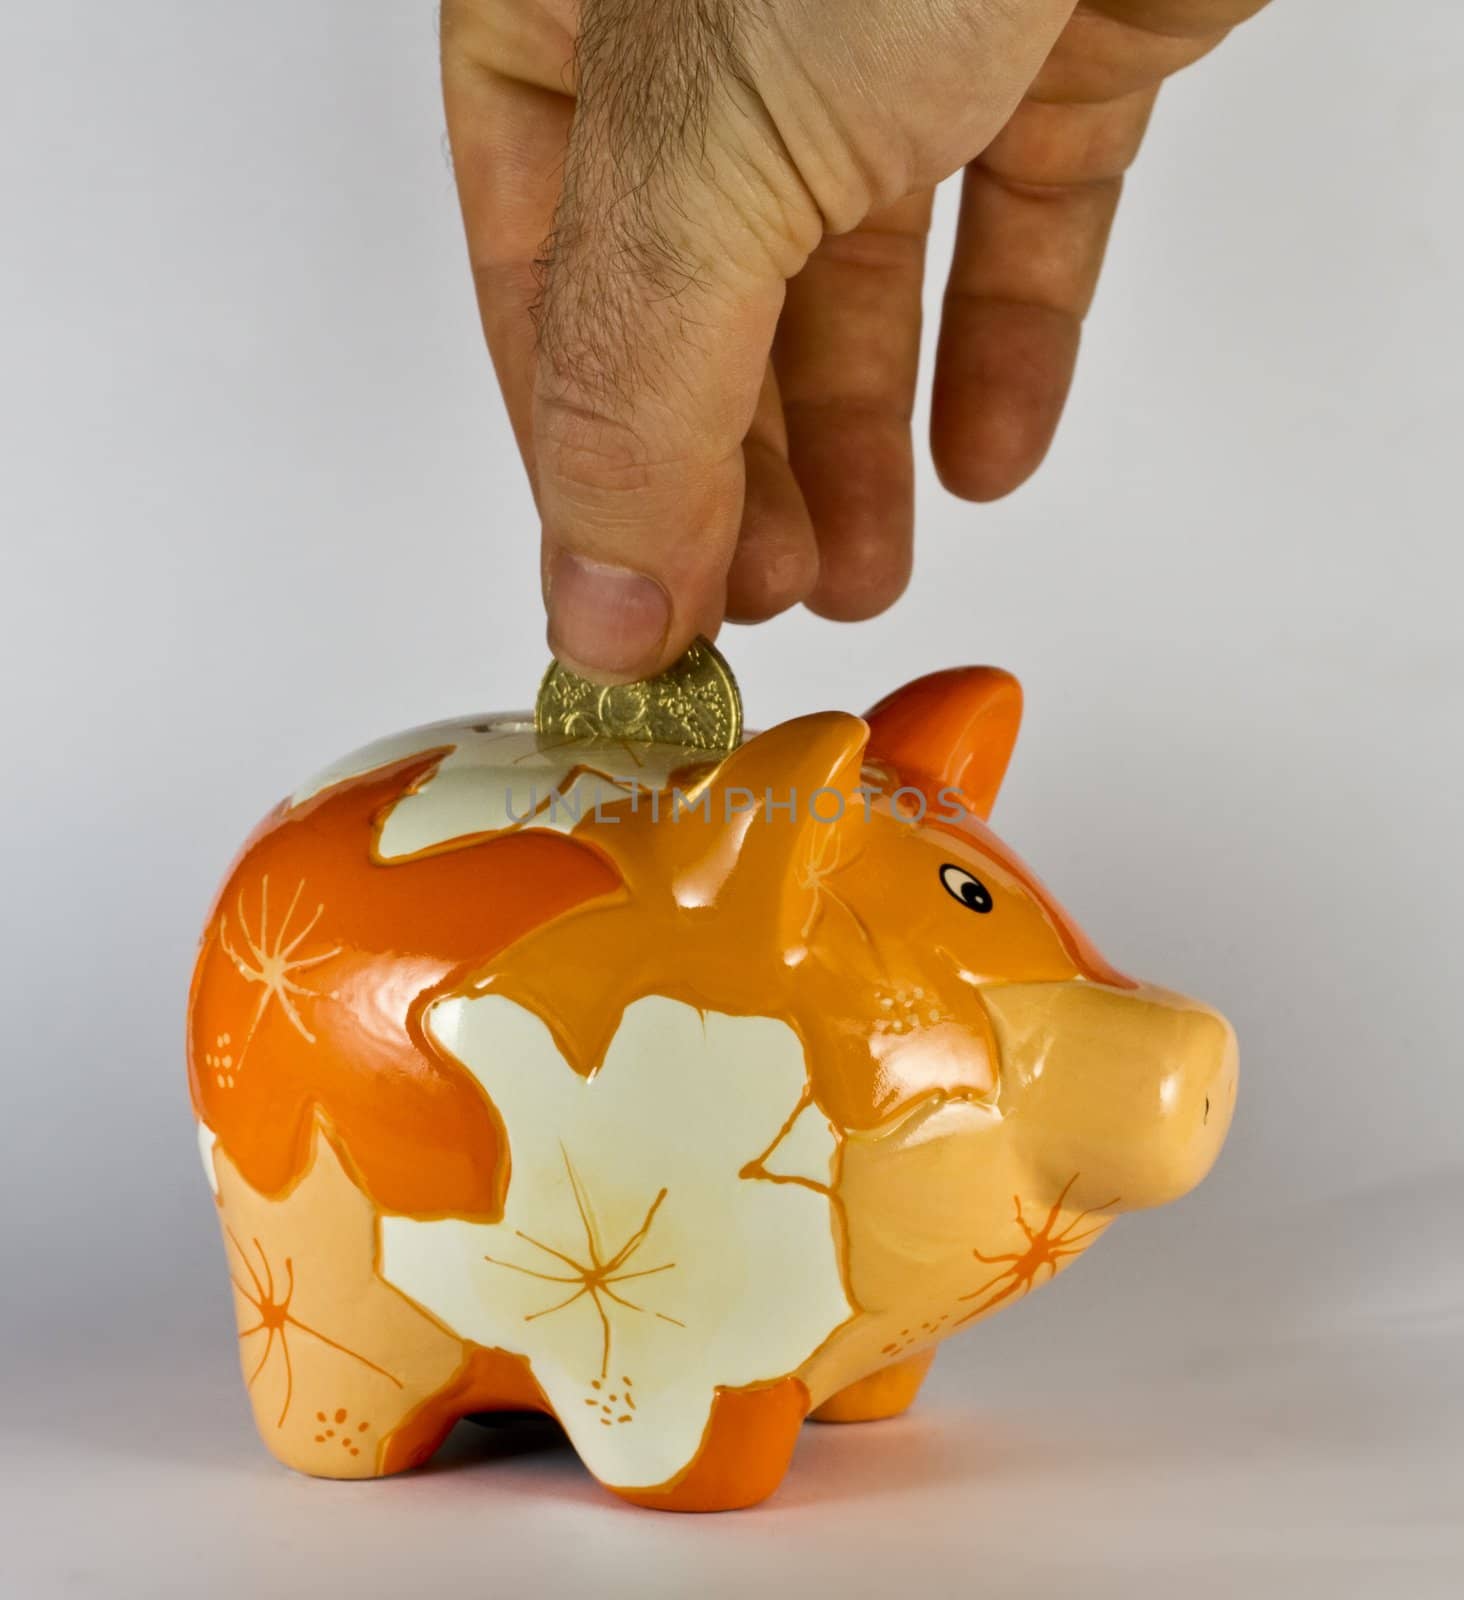 saving money by putting a coin in piggy bank